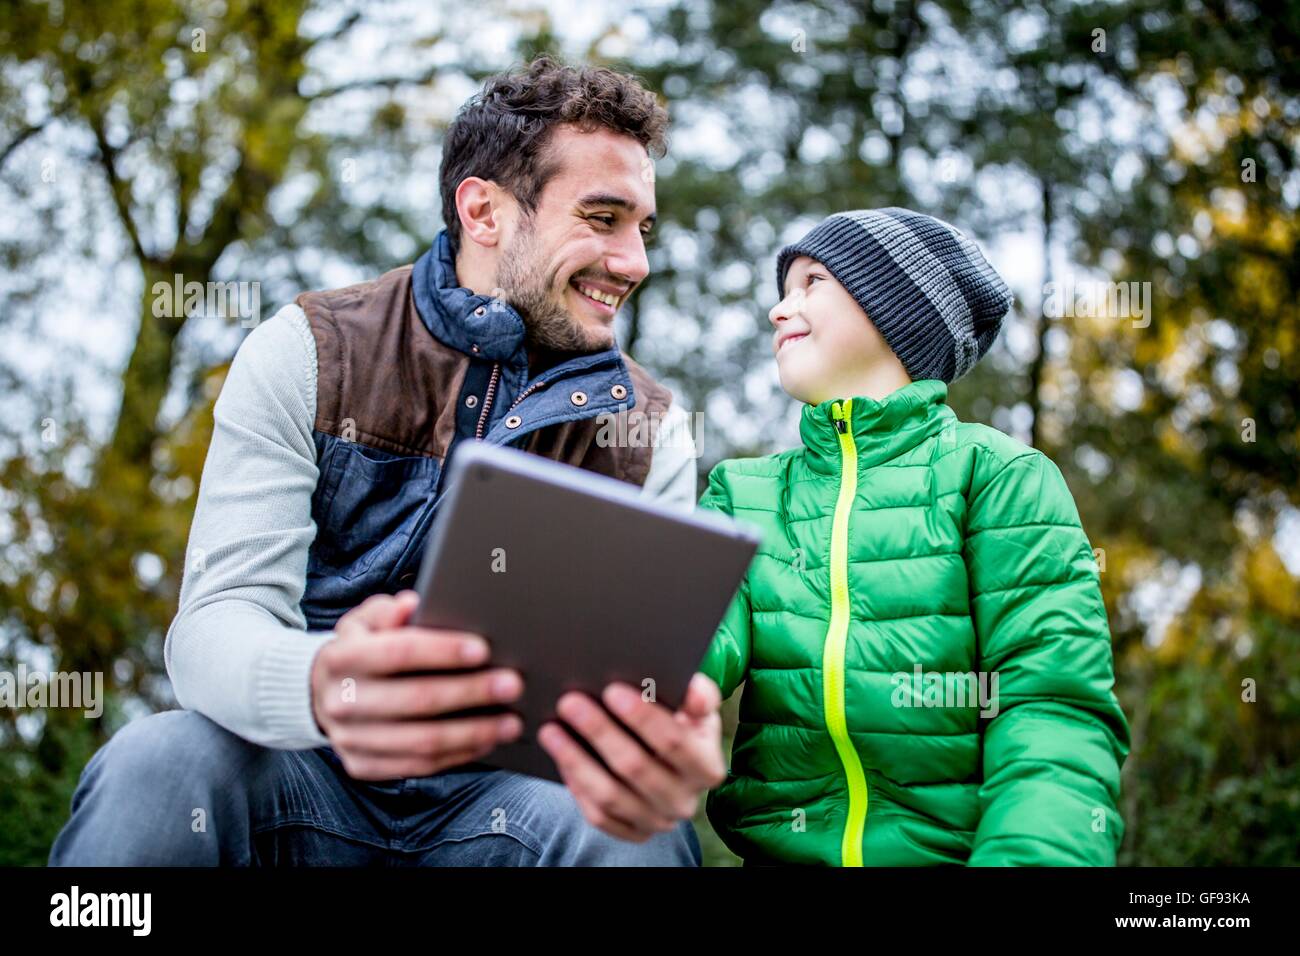 MODEL RELEASED. Father and son using digital tablet in autumn. Stock Photo